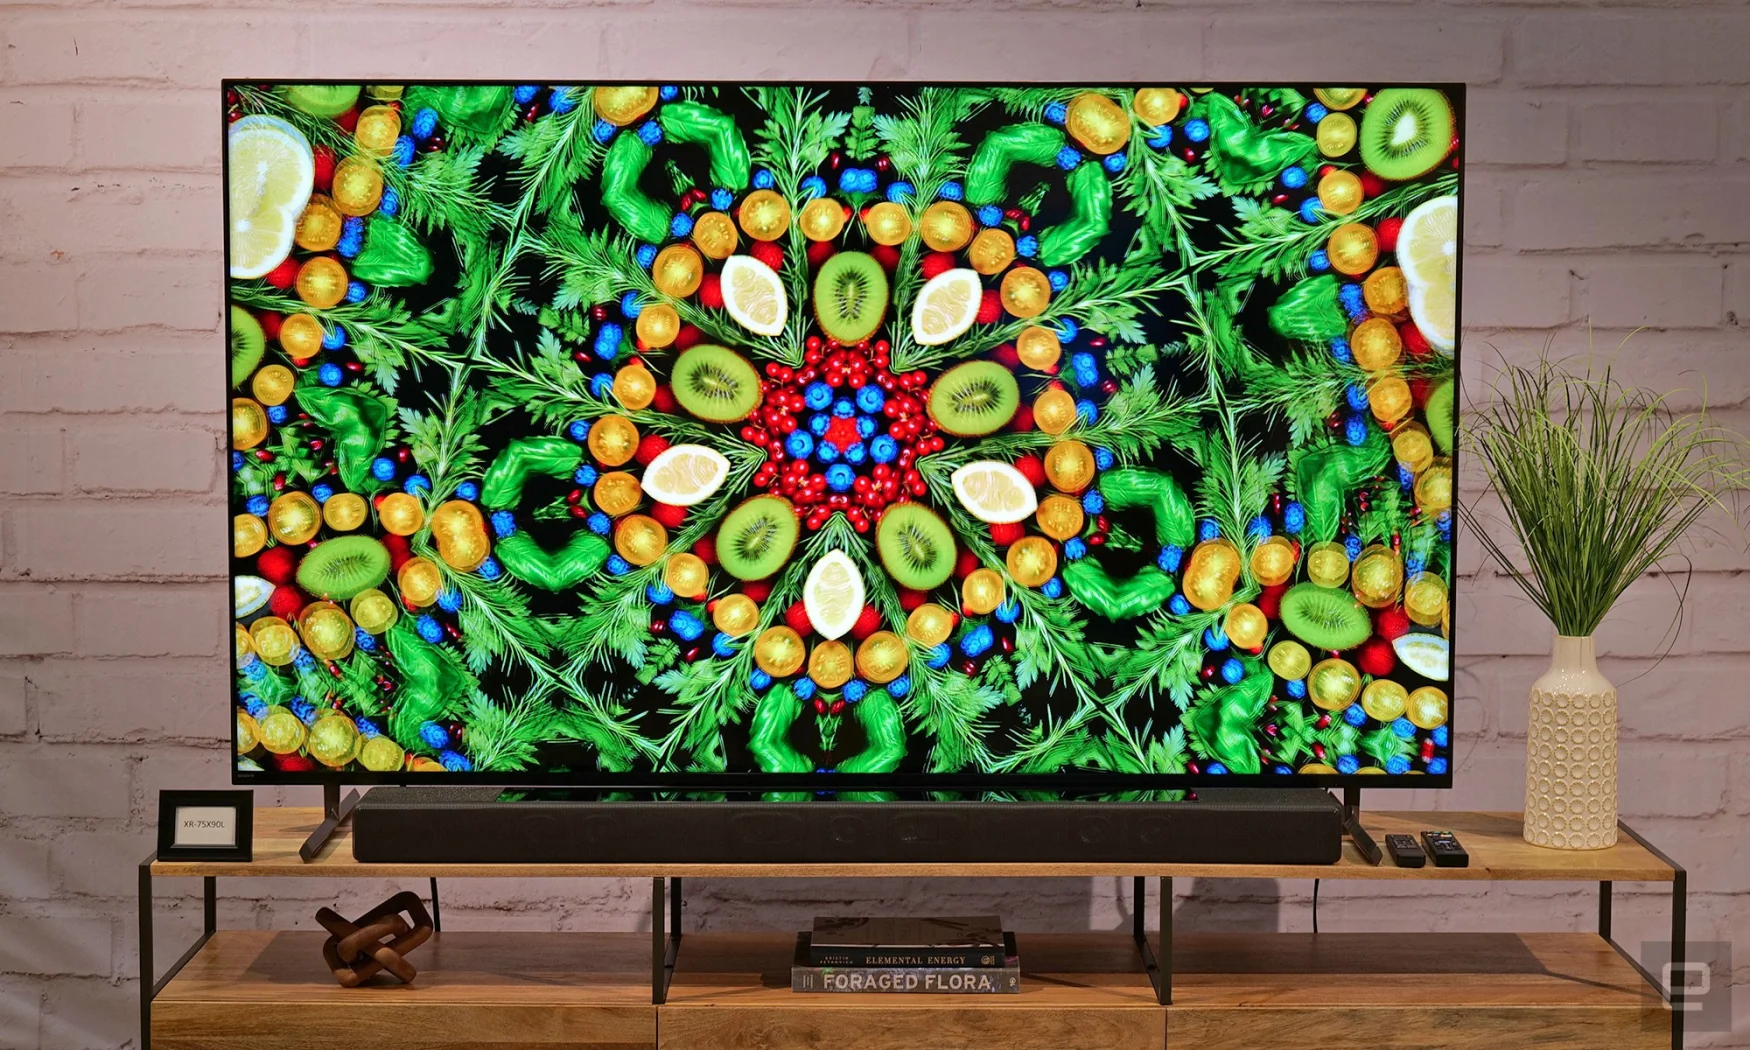 While a mid-range TV overall, the new X90L is poised to be the entry-level model in Sony's high-end Bravia XR TV family.  And with the largest model coming in at up to 98 inches, it's also the largest. 